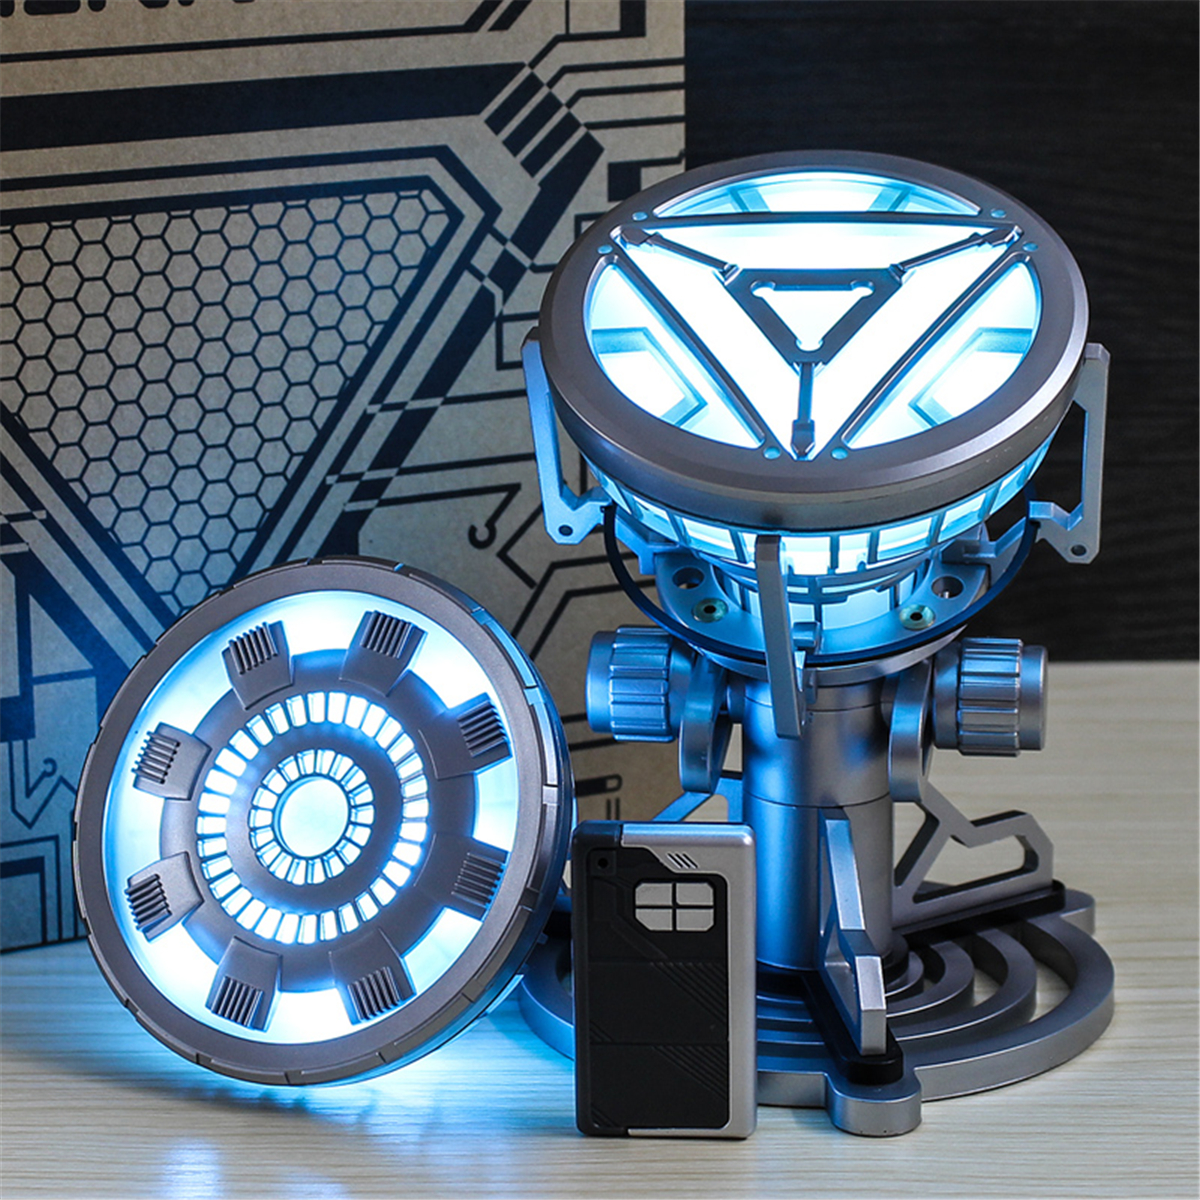 1:1 ARC REACTOR LED Chest Heart Light-up Lamp Movie ABC Props Model Kit Science Toy 12